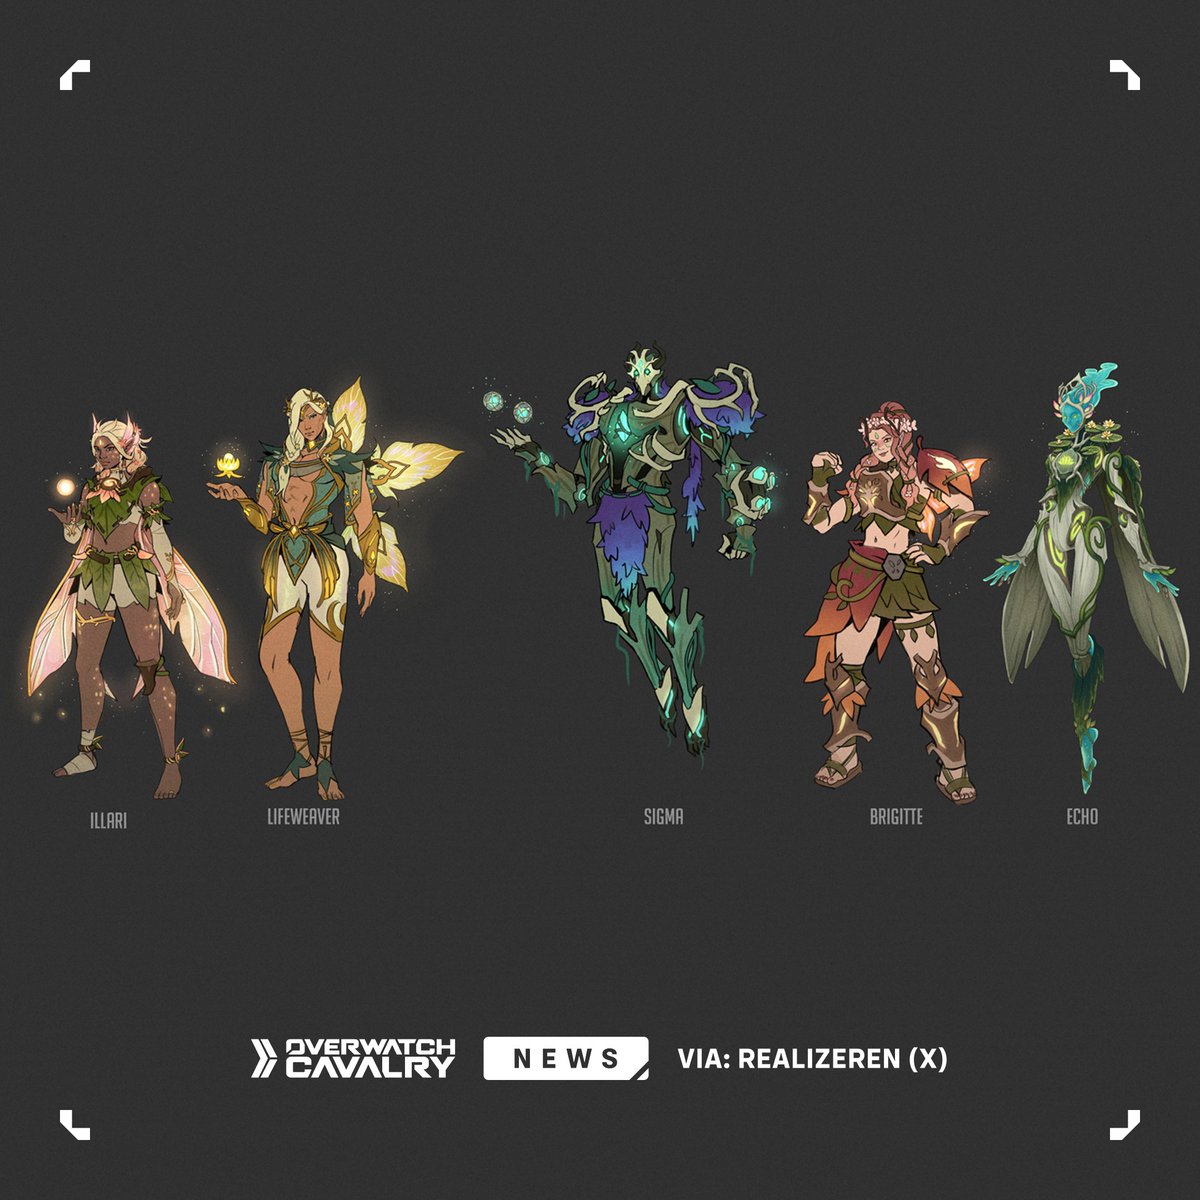 Fairy skin concepts from the new #Overwatch2 survey 🧚 📸 Image Credit: @realizeren